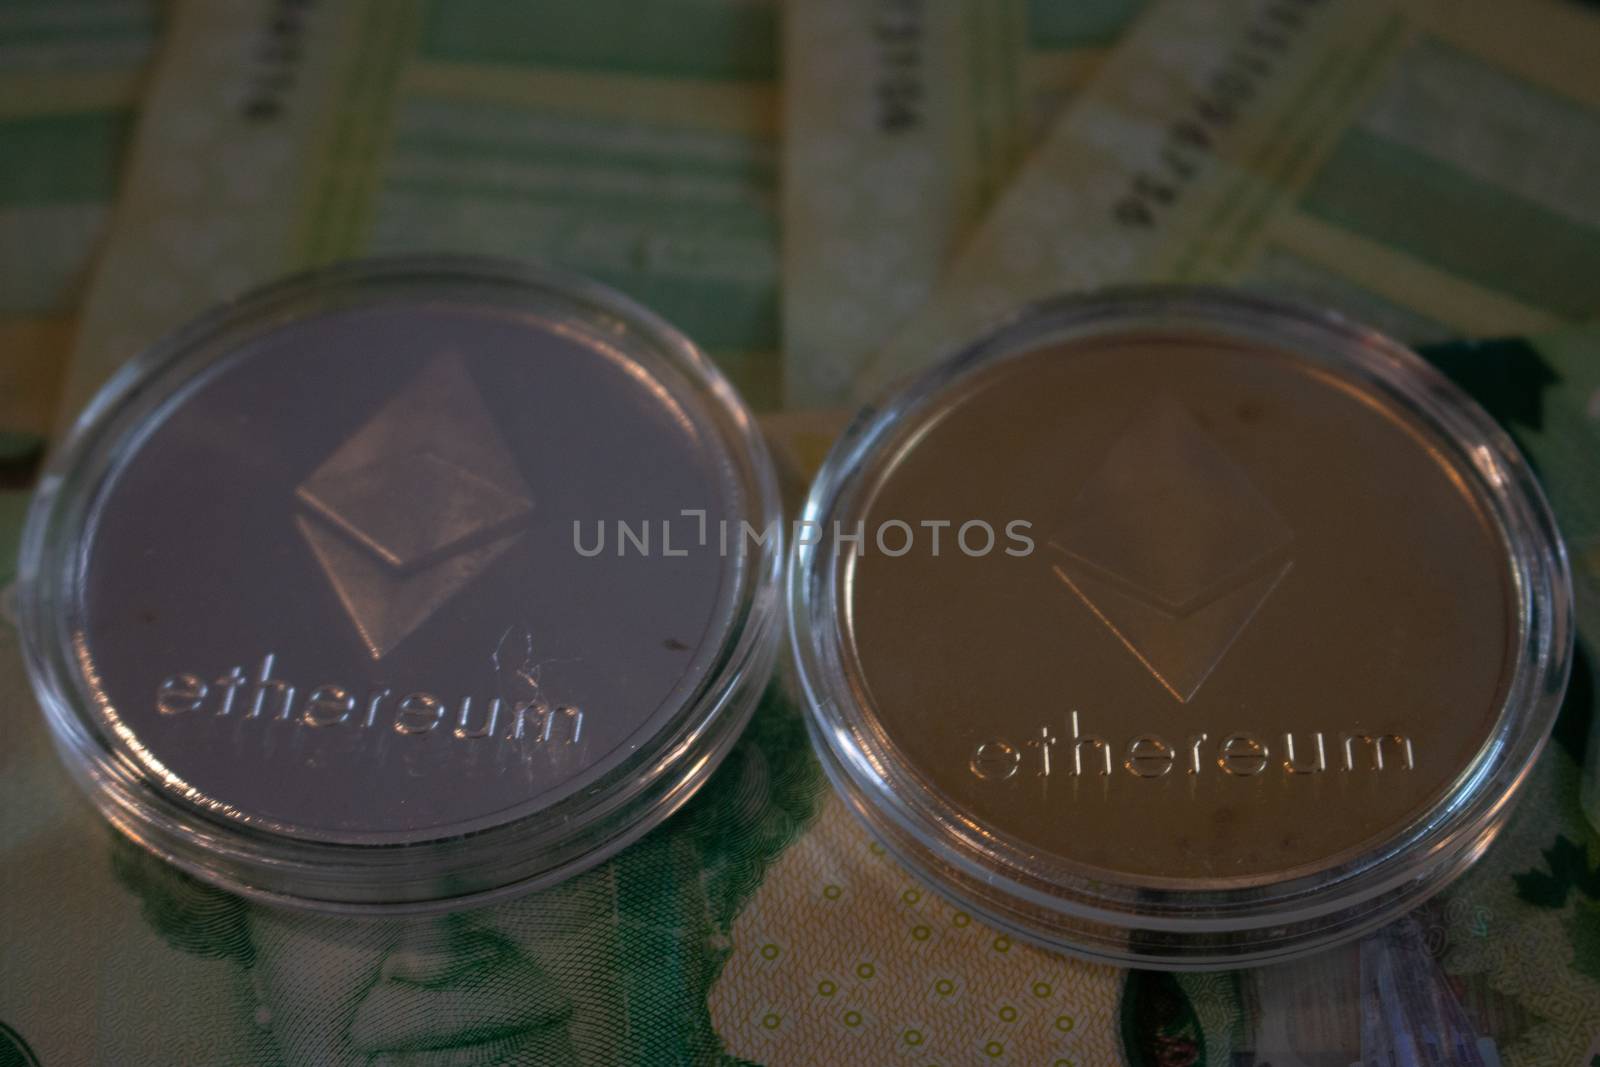 This is a cryptocurrency themed photo in Canada on Canadian money.